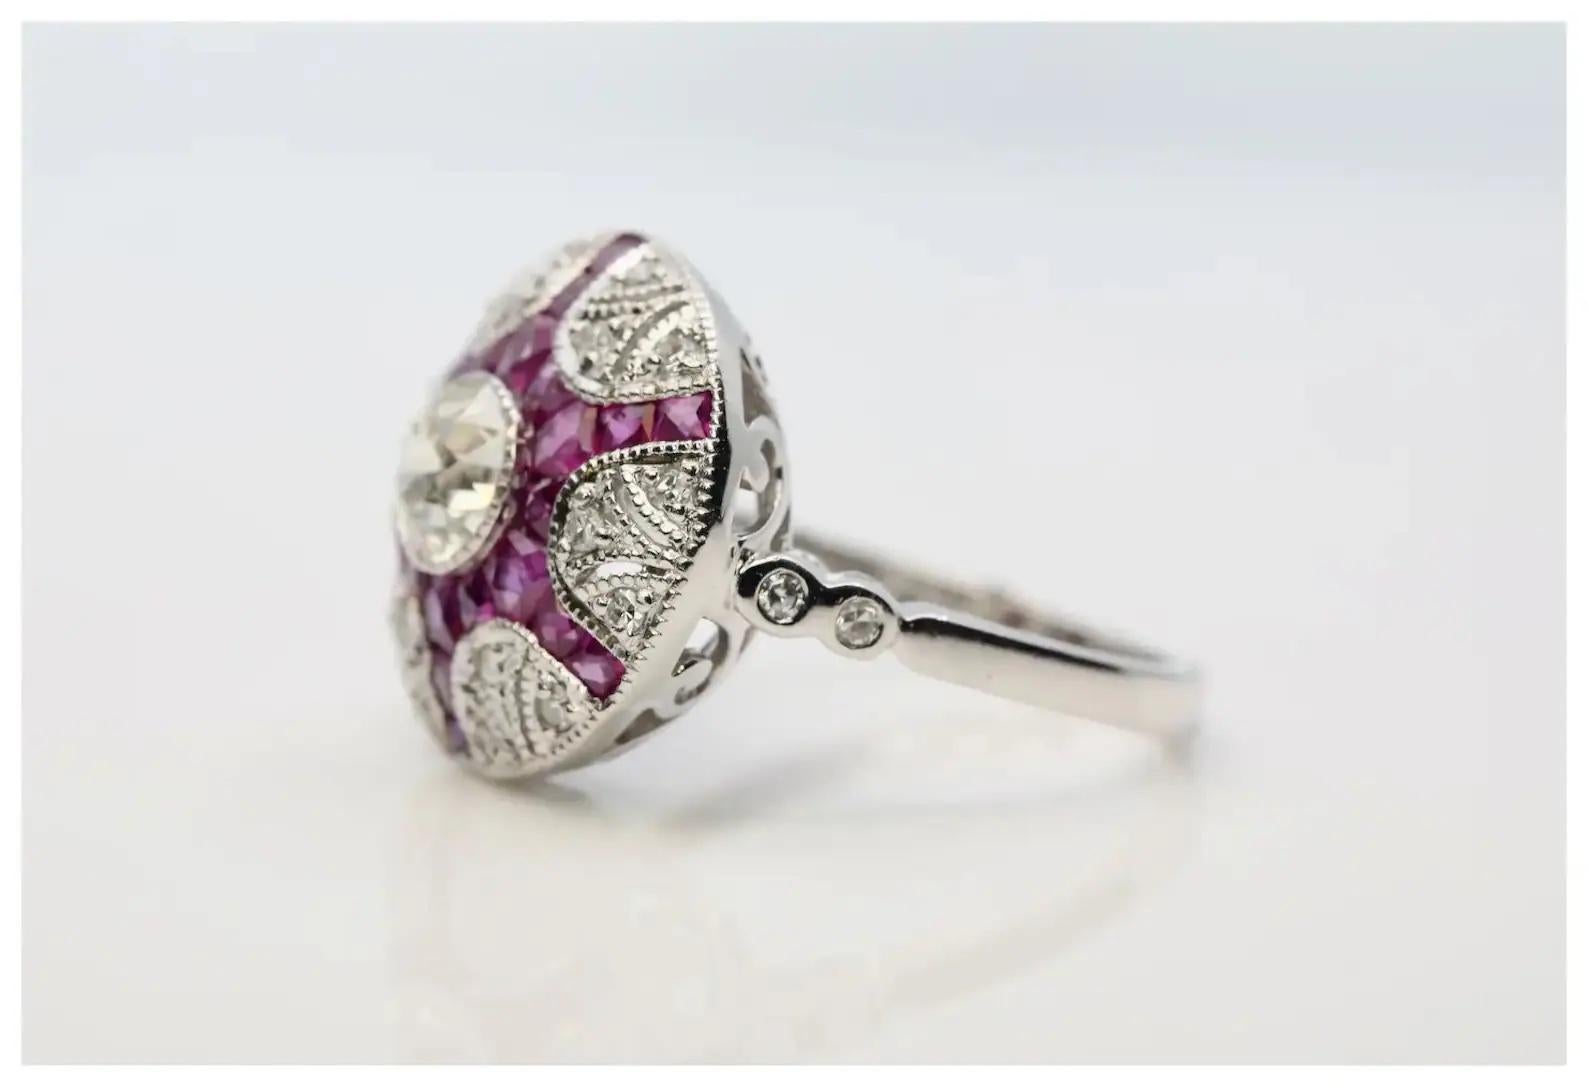 An Art Deco inspired diamond, and ruby dome style ring in platinum.

Centered by a 0.65 carat old European cut diamond of L color and VS2 clarity set in a miligrained platinum bezel.

Framed by rays of French cut rubies, and pave set diamonds.

The